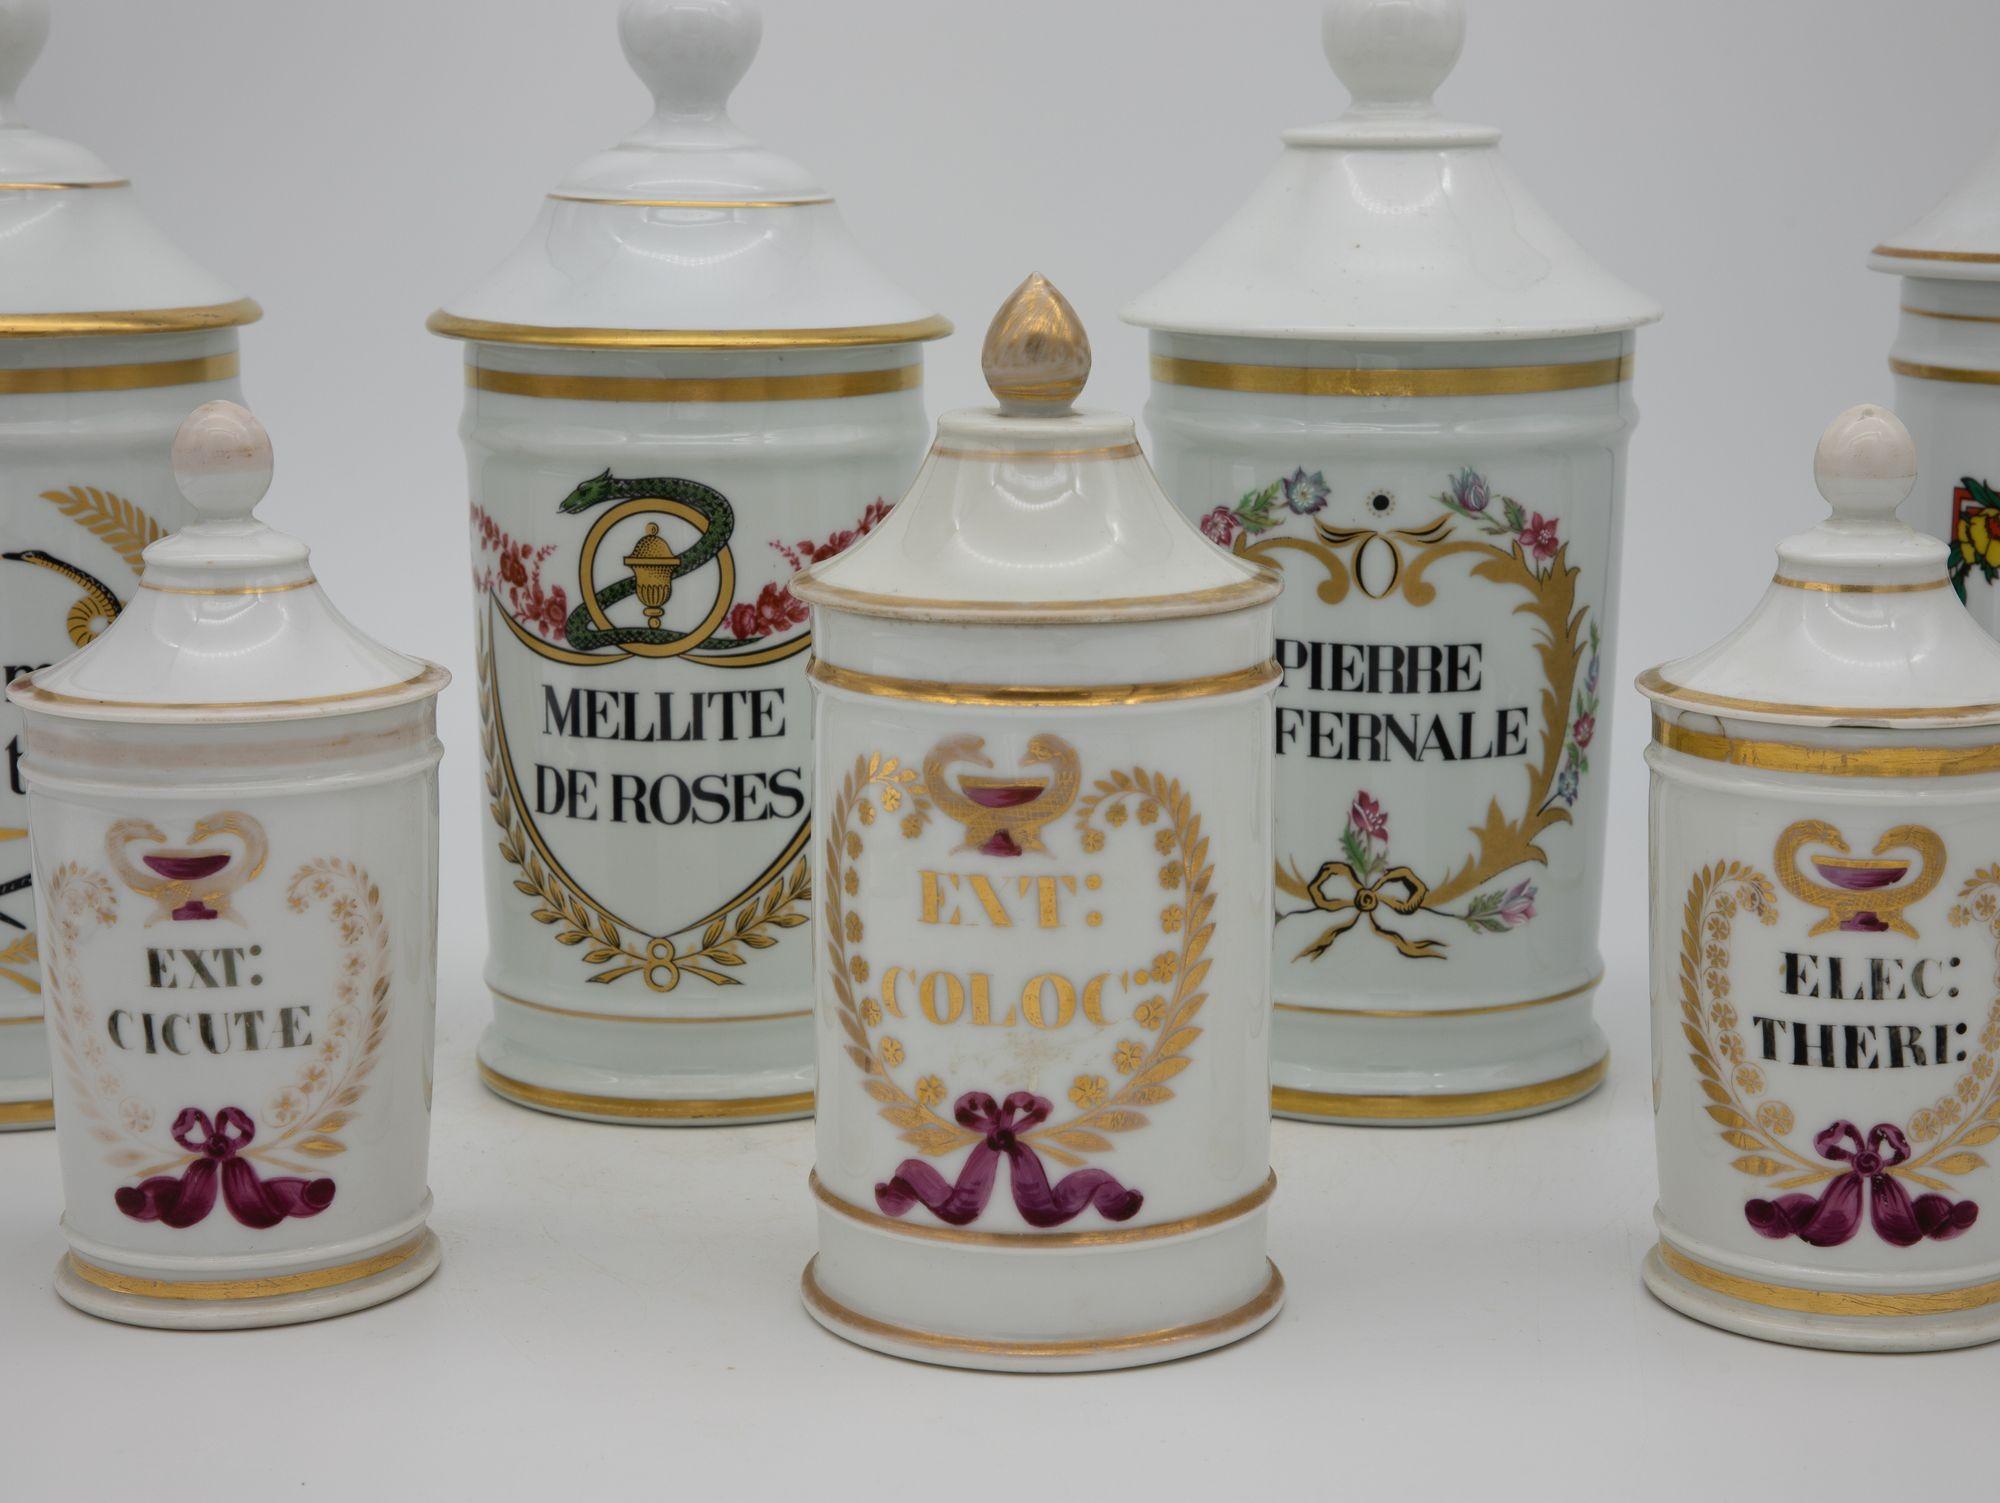 A matched set of seven vintage French apothecary jars or pharmacy vases. These jars vary in age and all are from the 20th century. This set inclused highly sought jars of Arsenic and Opium. Three jars are from the same set and feature a gold design